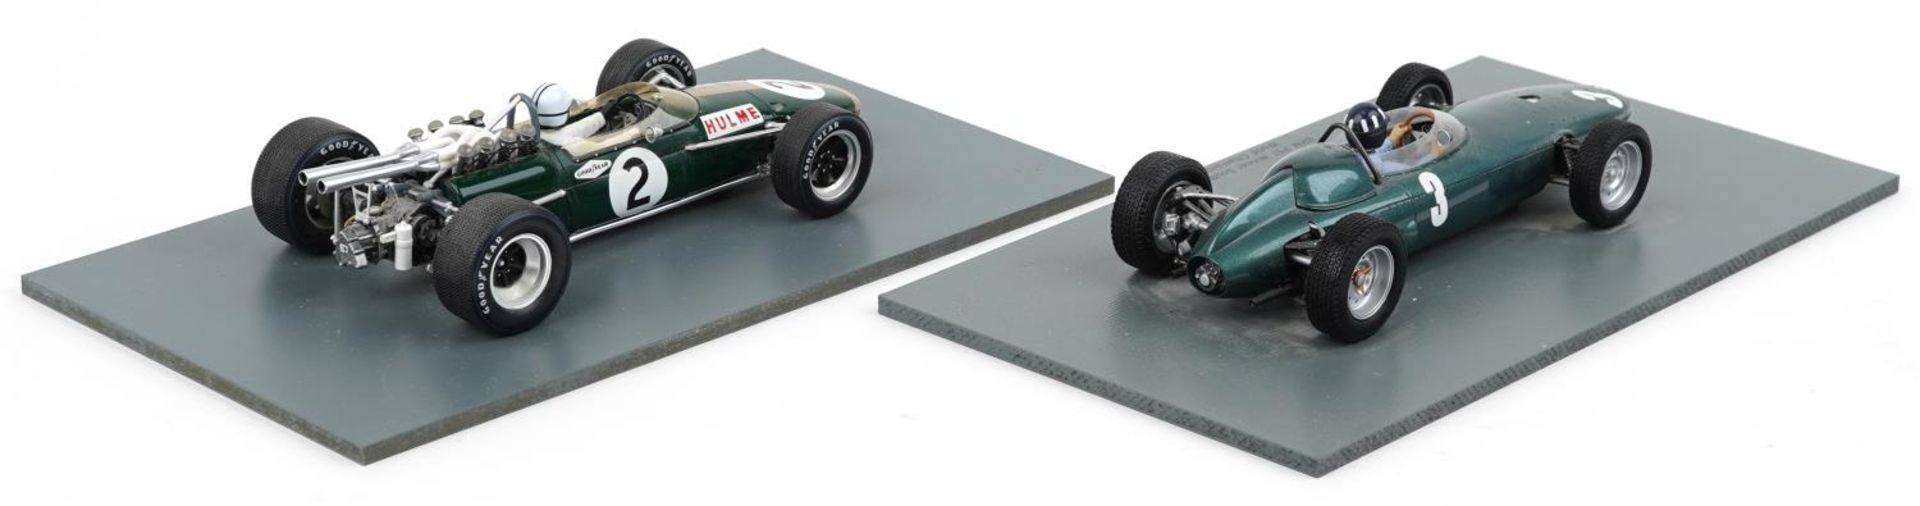 Two Spark 1:18 scale diecast model racing vehicles with boxes and display stands comprising BRM - Bild 3 aus 3